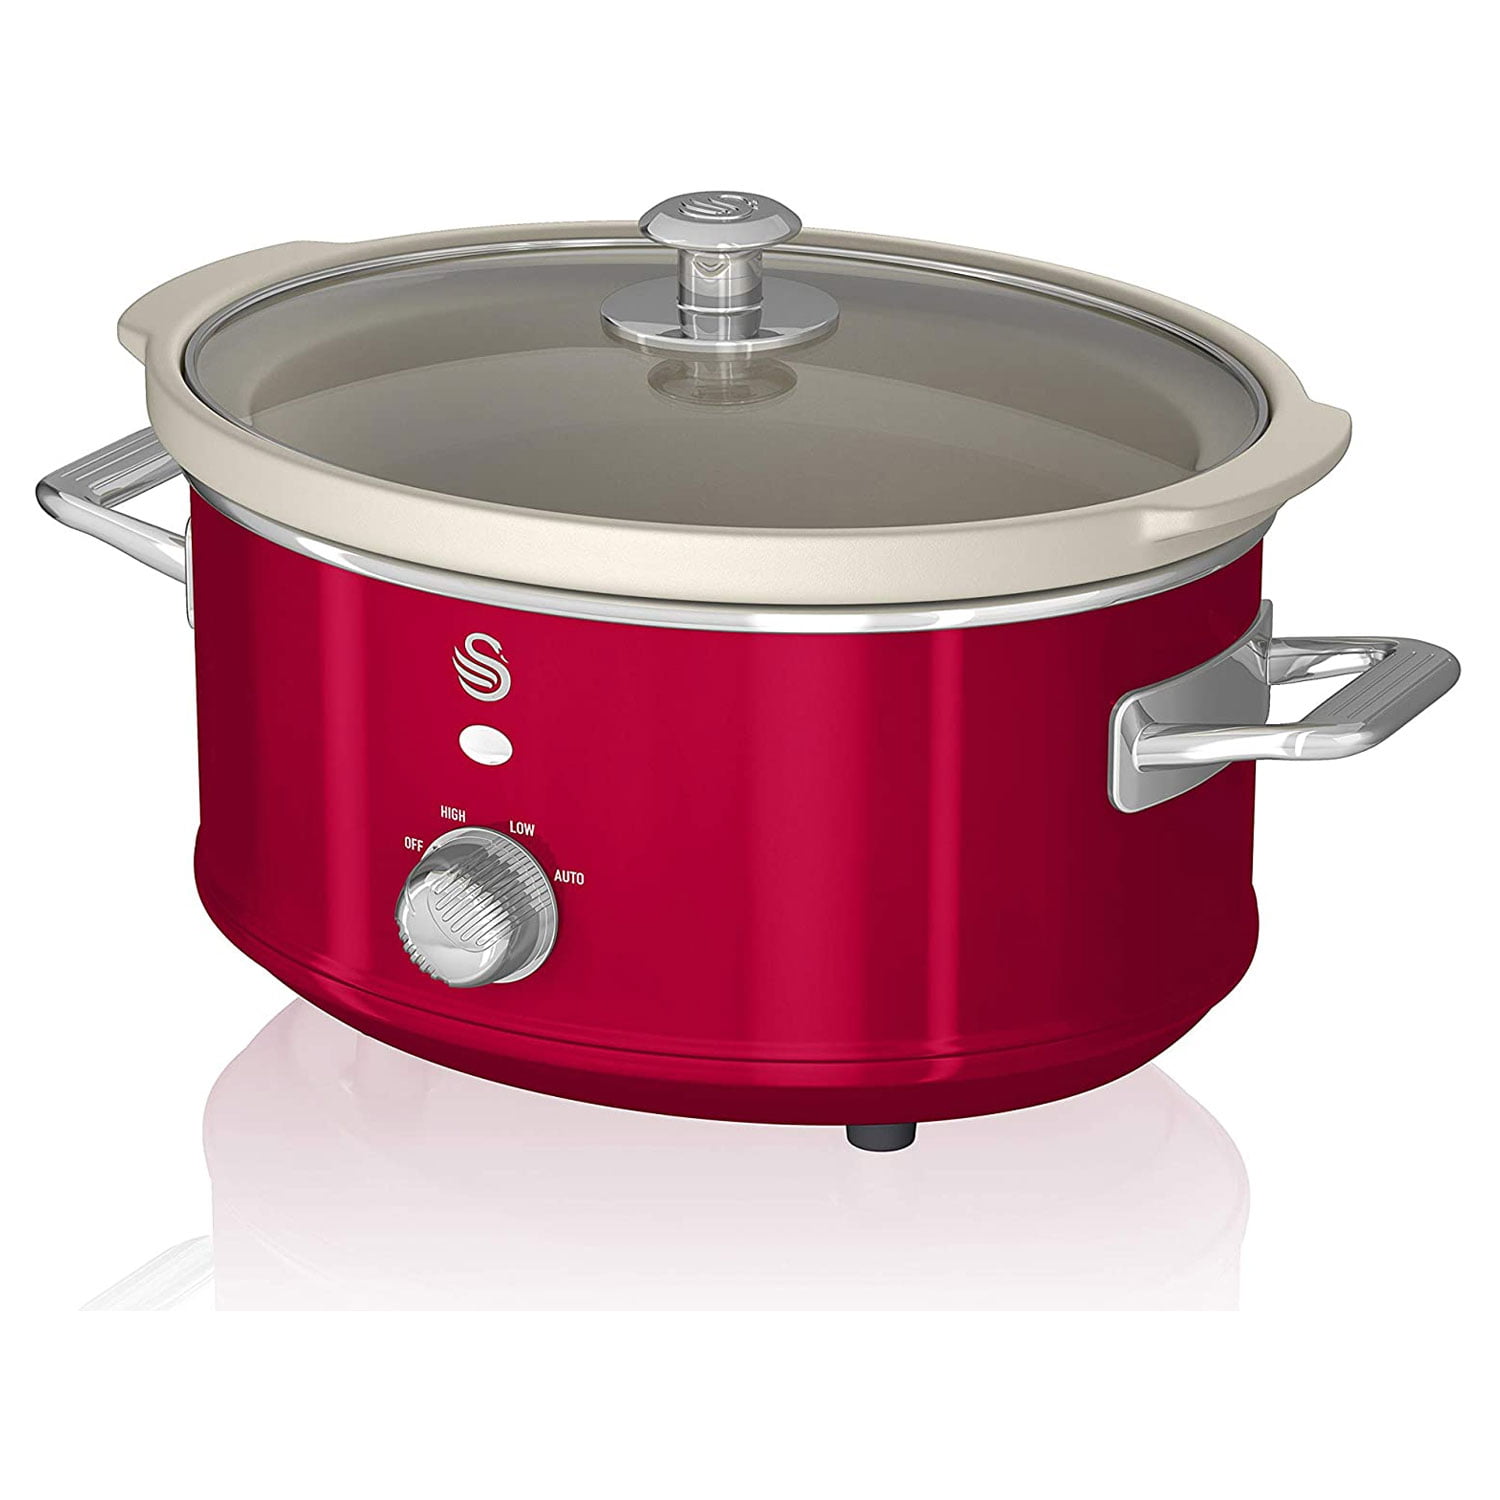 Stay or Go® Slow Cooker - Red - 33451